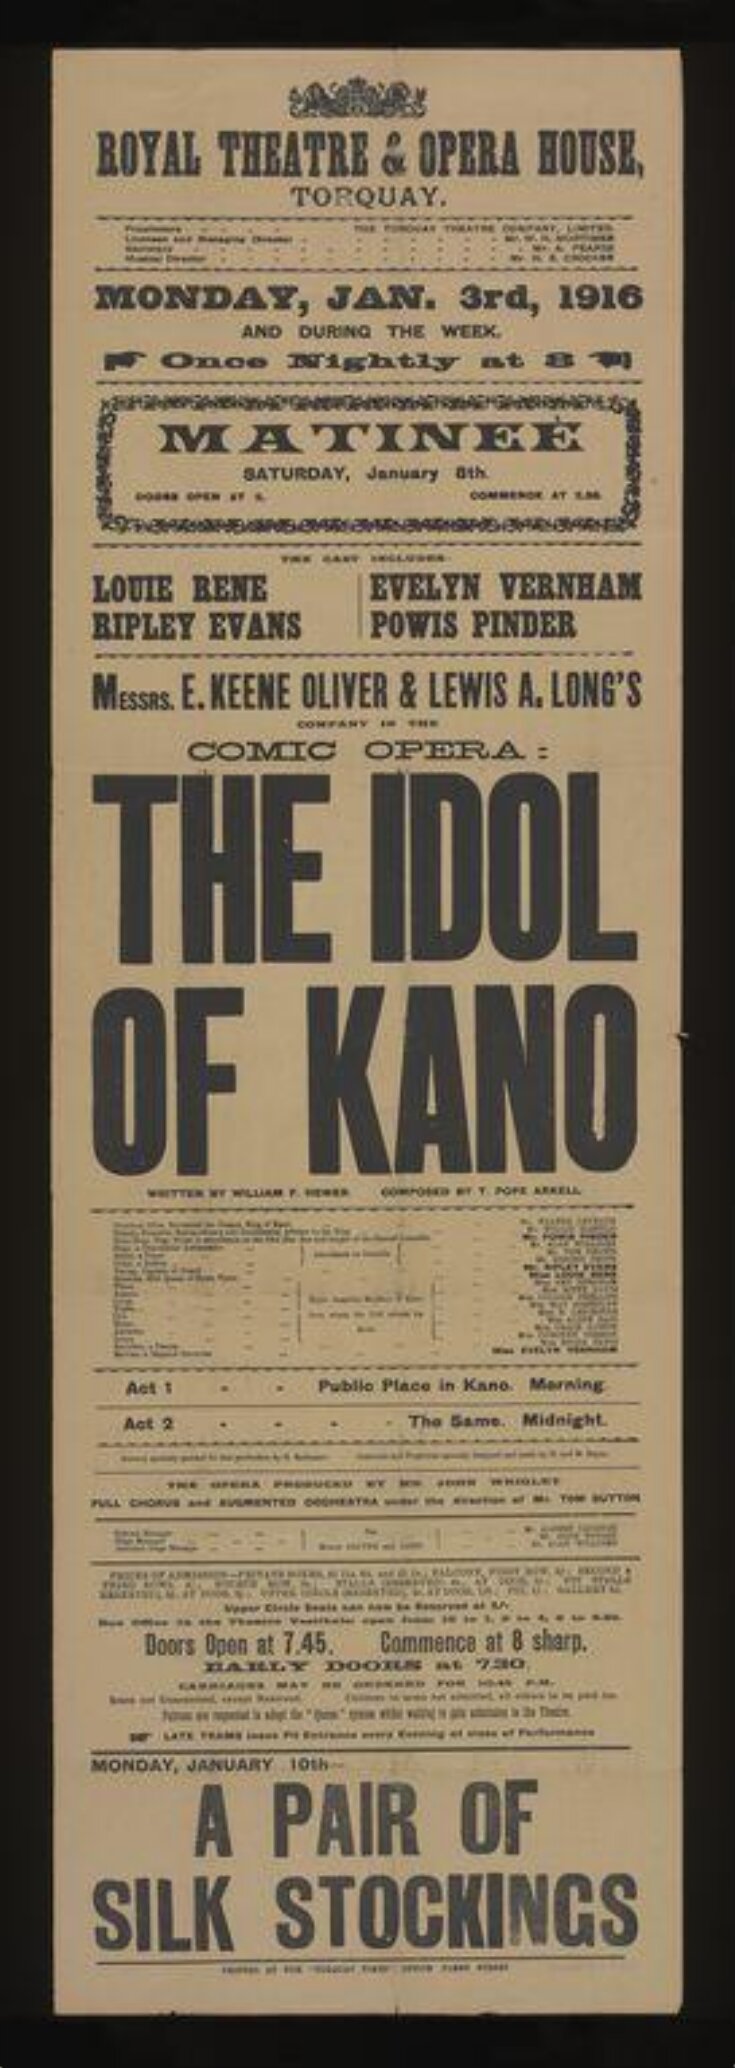 The Idol of Kano poster top image